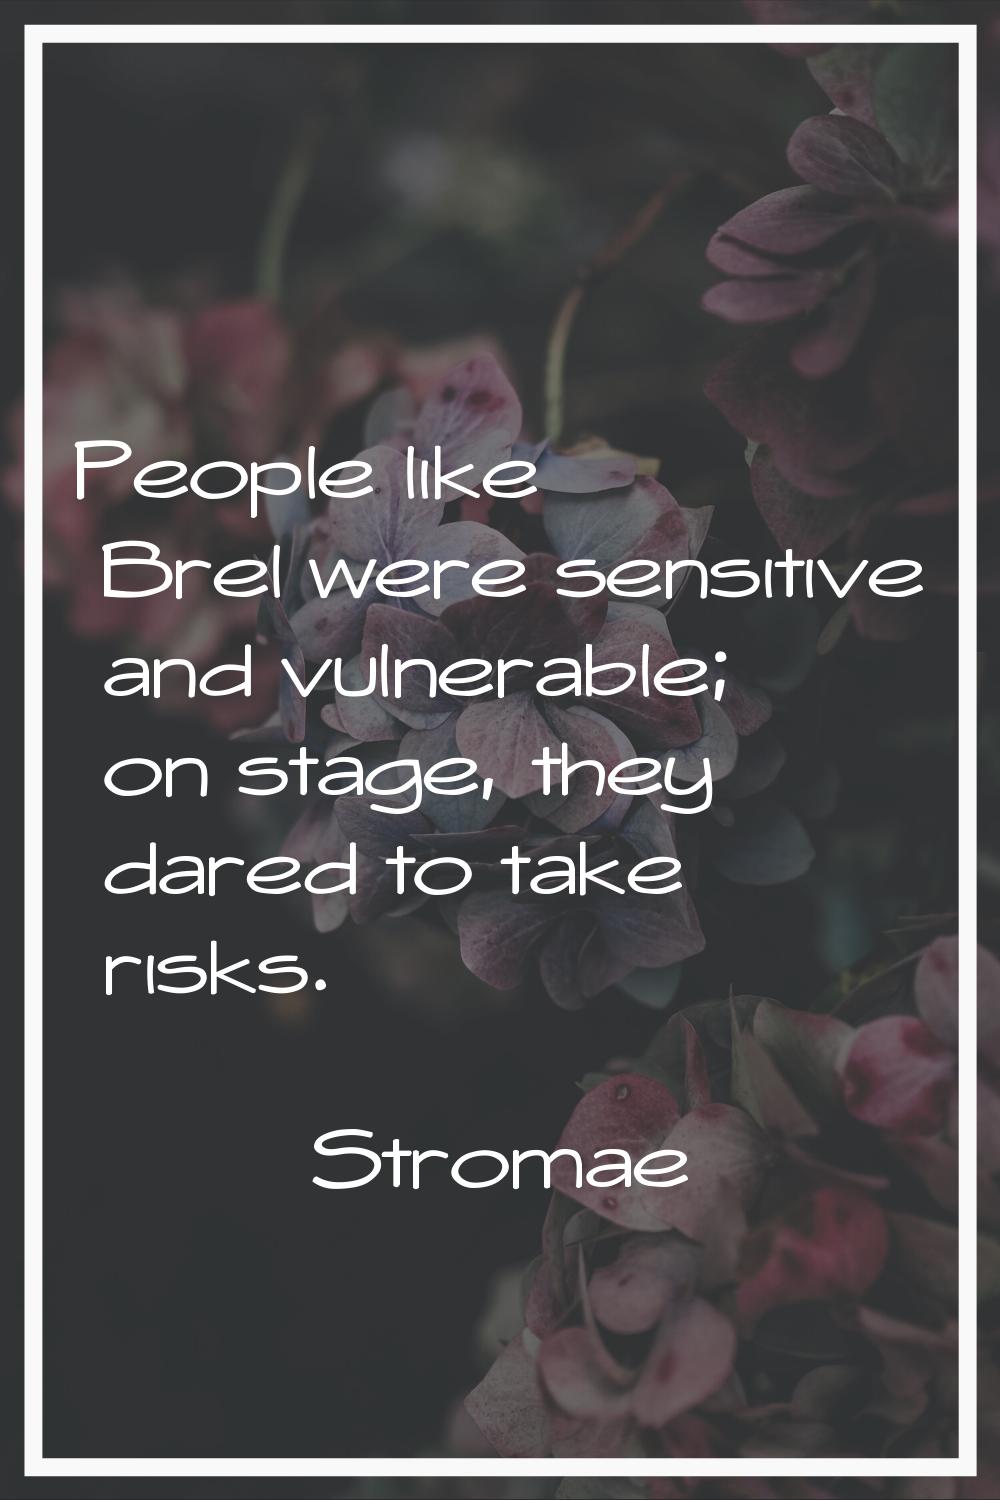 People like Brel were sensitive and vulnerable; on stage, they dared to take risks.